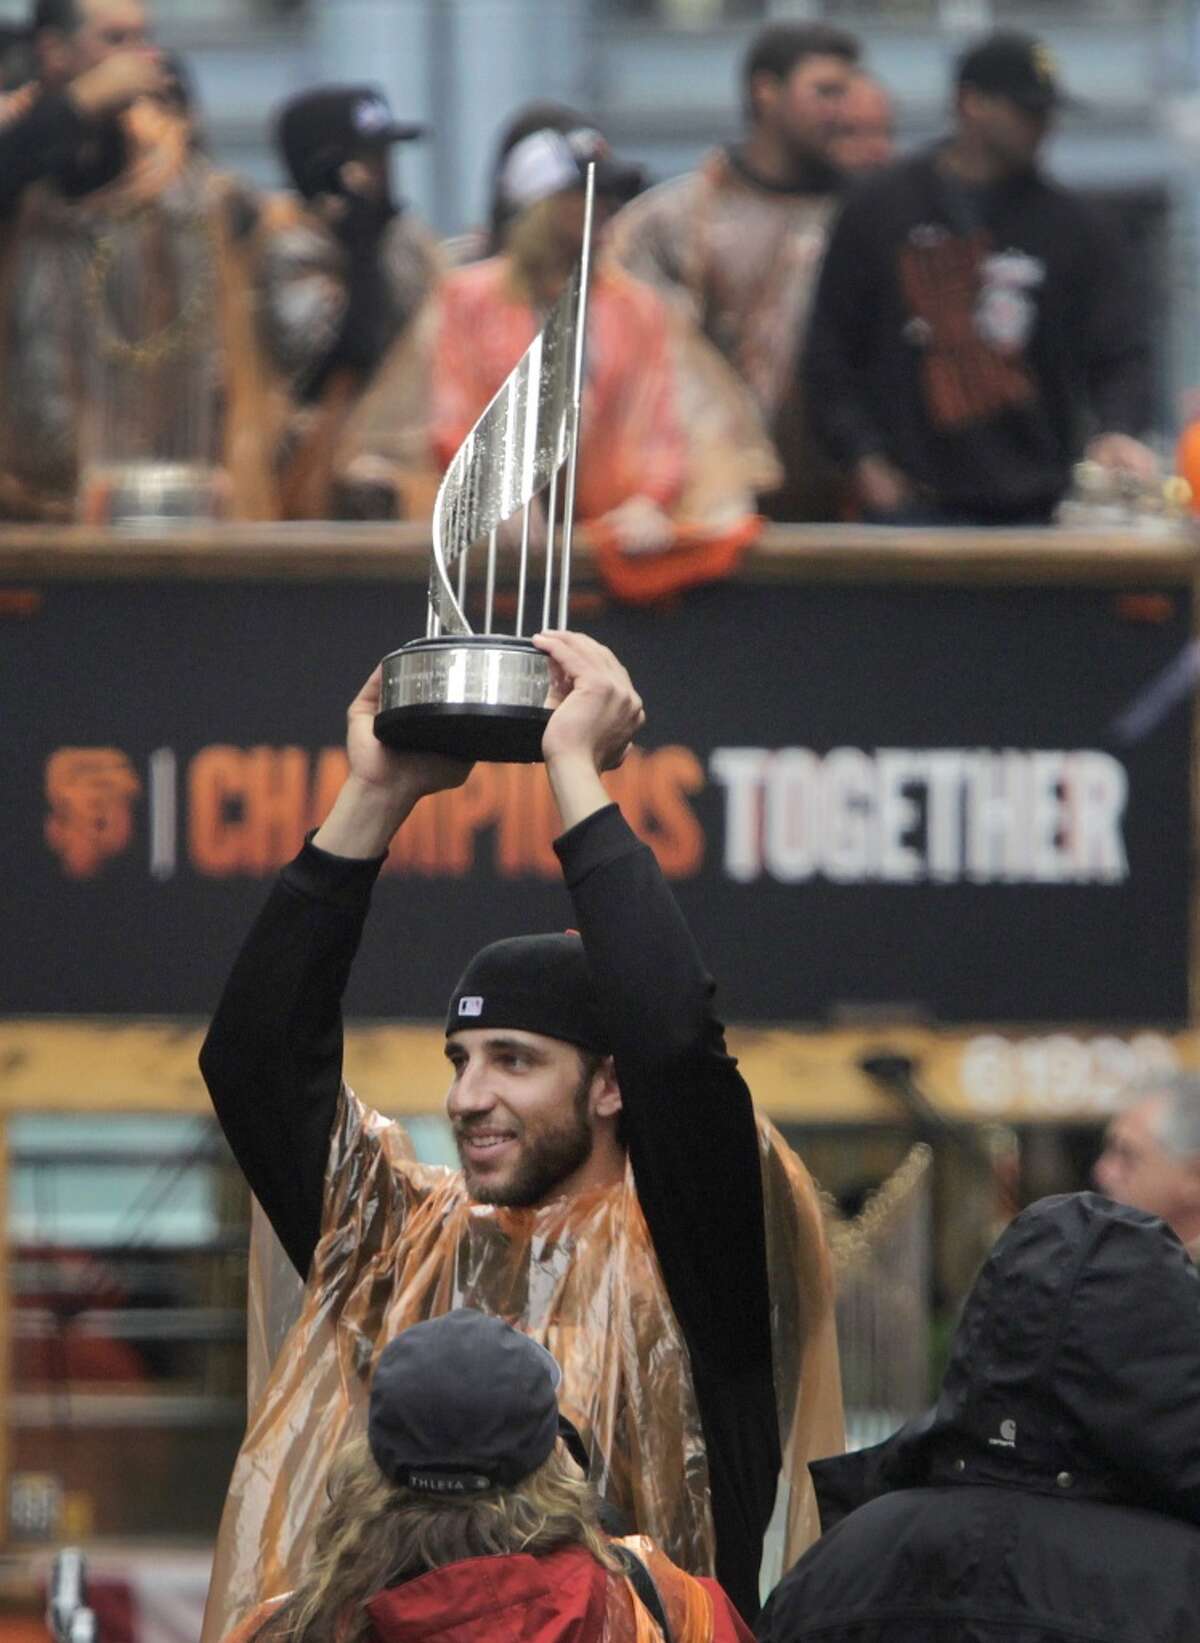 Madison Bumgarner hoists one of his postseason MVP trophies during the Giants' World Series victory parade in San Francisco, Calif. on Friday, Oct. 31, 2014. The Giants captured their third championship in five years after defeating the Kansas City Royals in a seven-game series.